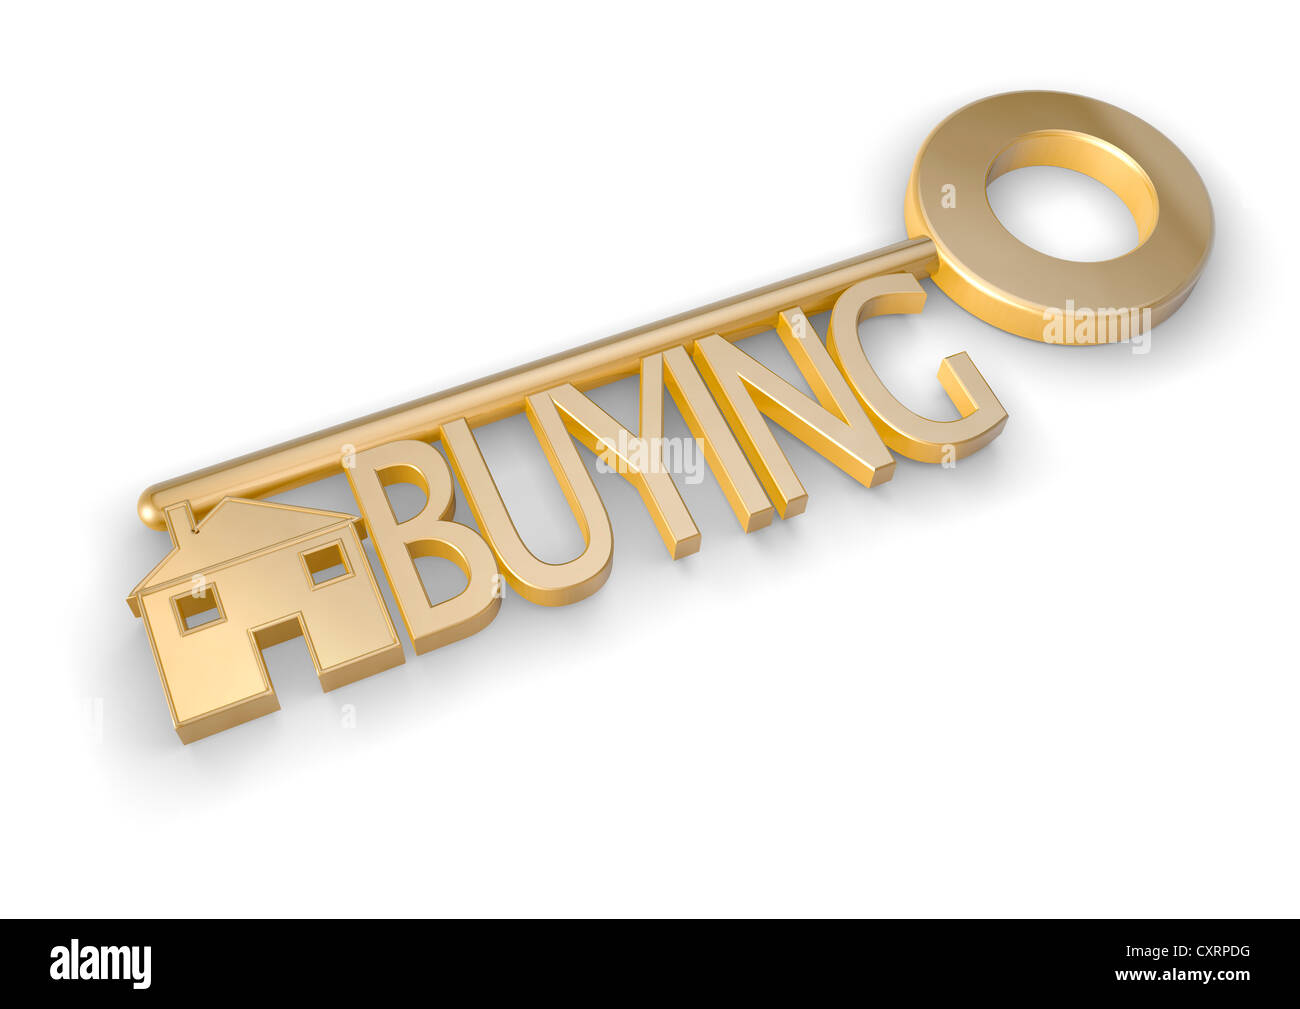 3D render of a gold key with the word BUYING and a house symbol - Concept image Stock Photo